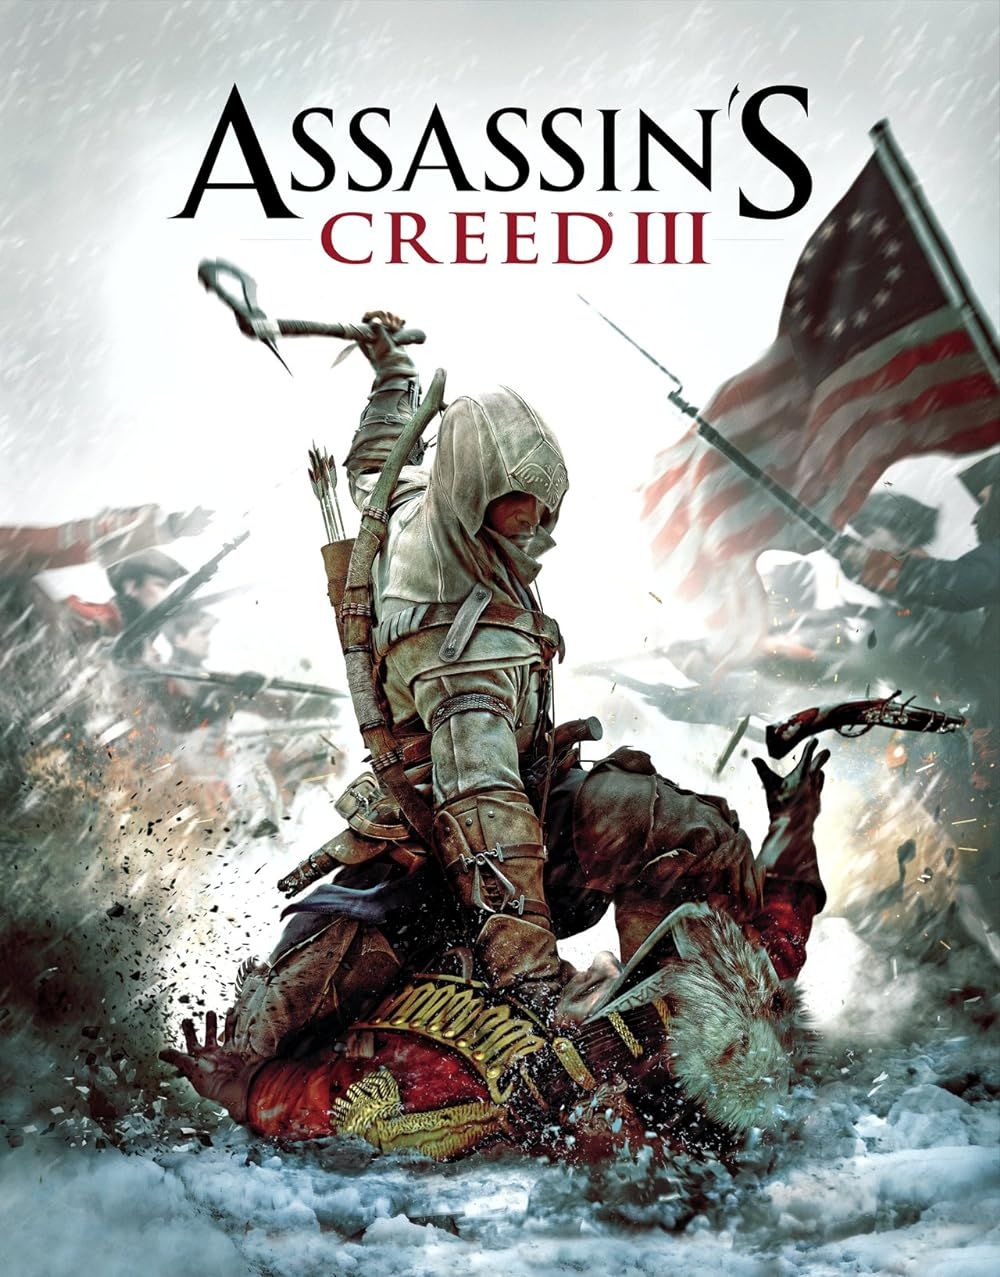 Connor Kenway attacks an enemy on the cover of Assassin's Creed III